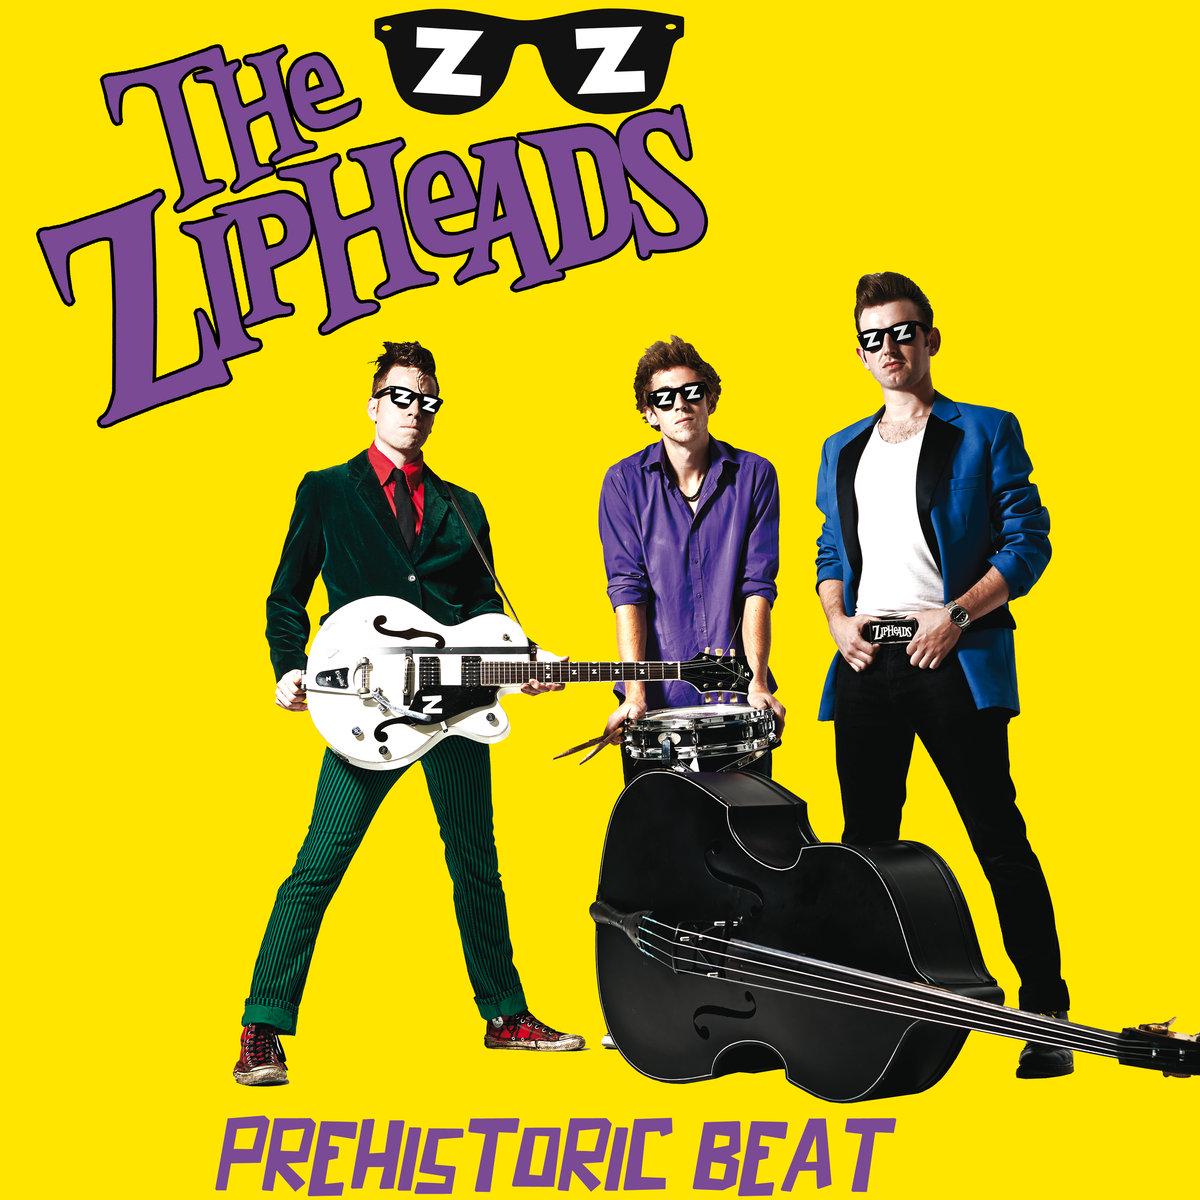 The Zipheads at The New Adelphi Club